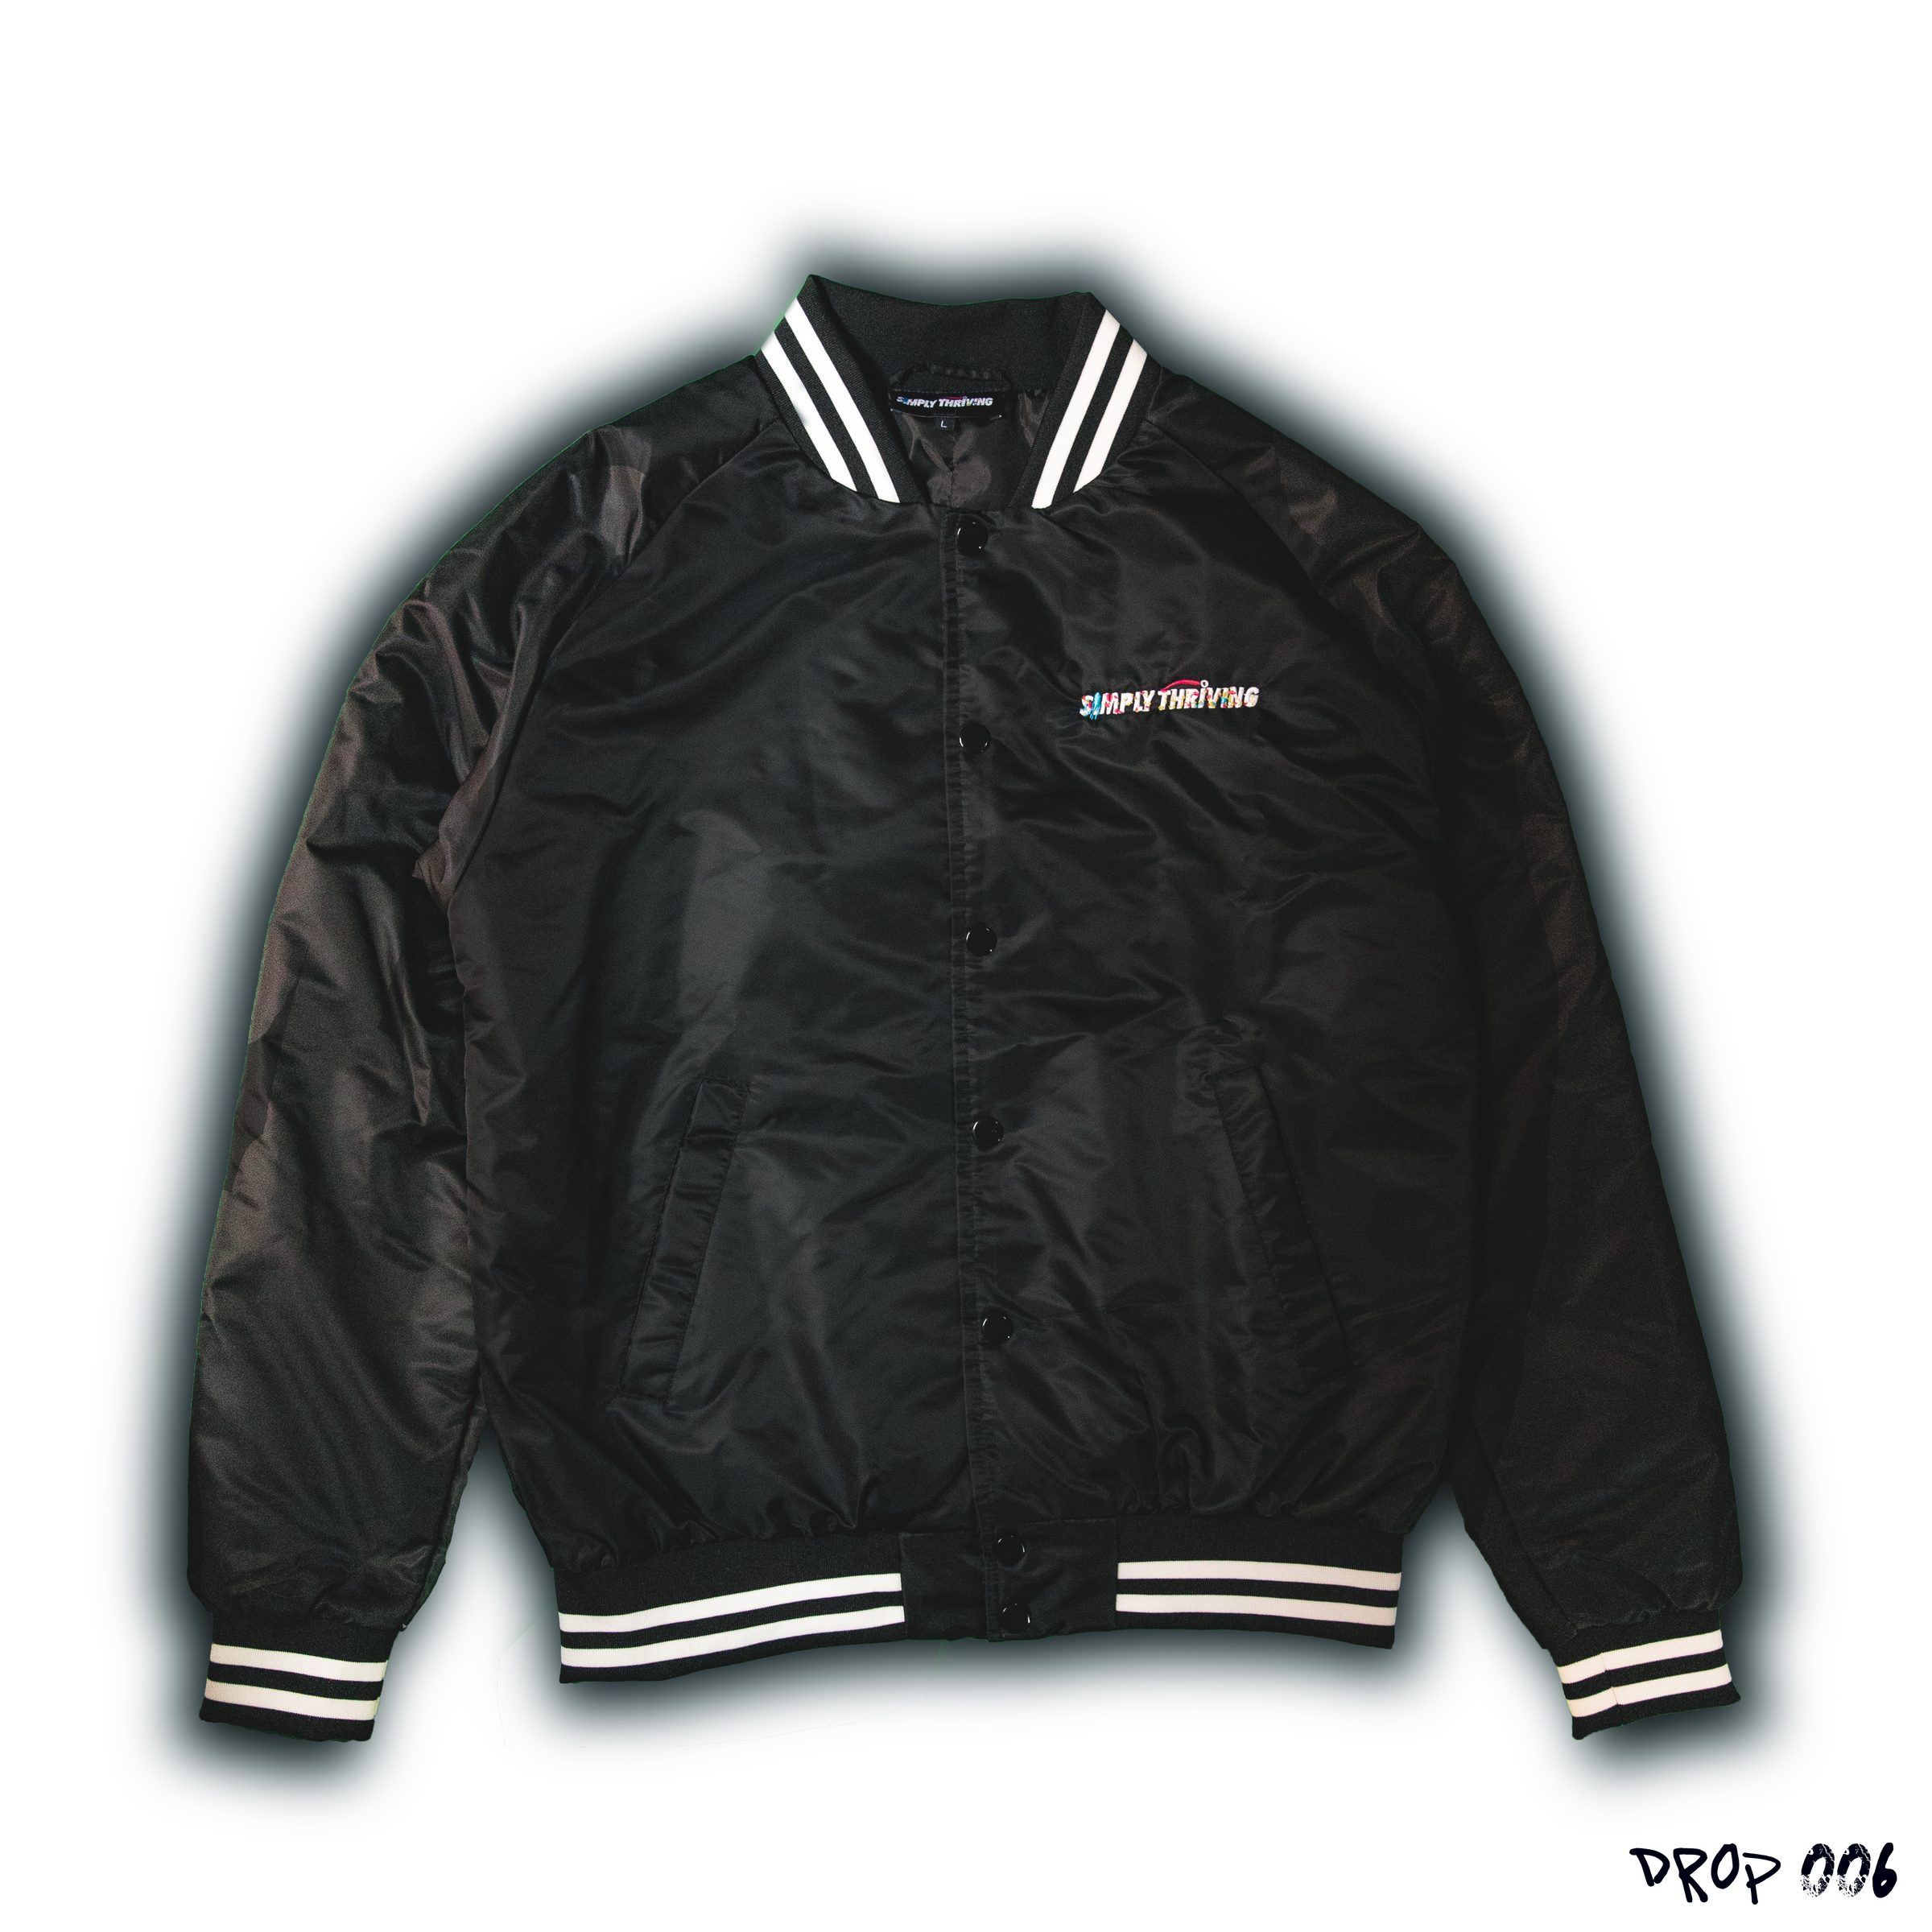 Simply 'Members Only' Jacket – Simply Brand